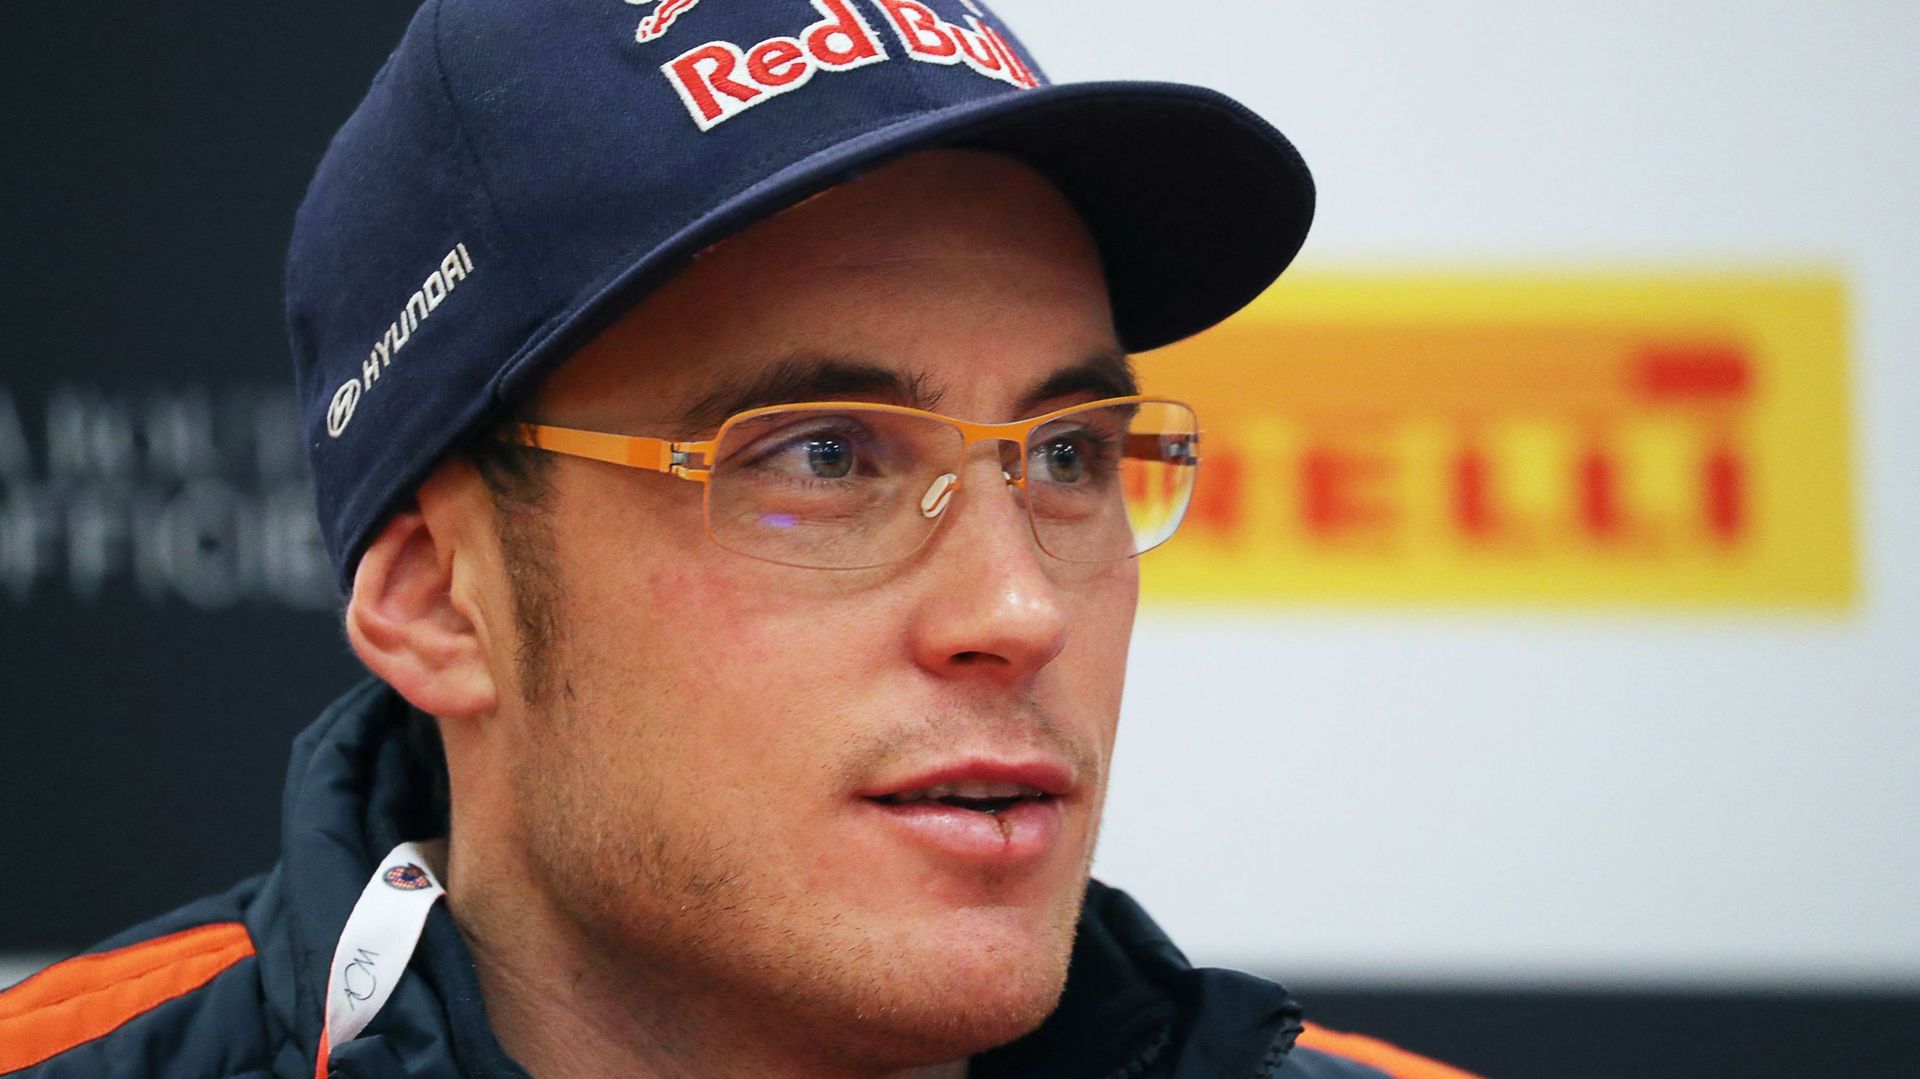 Thierry Neuville, pilote WRC.